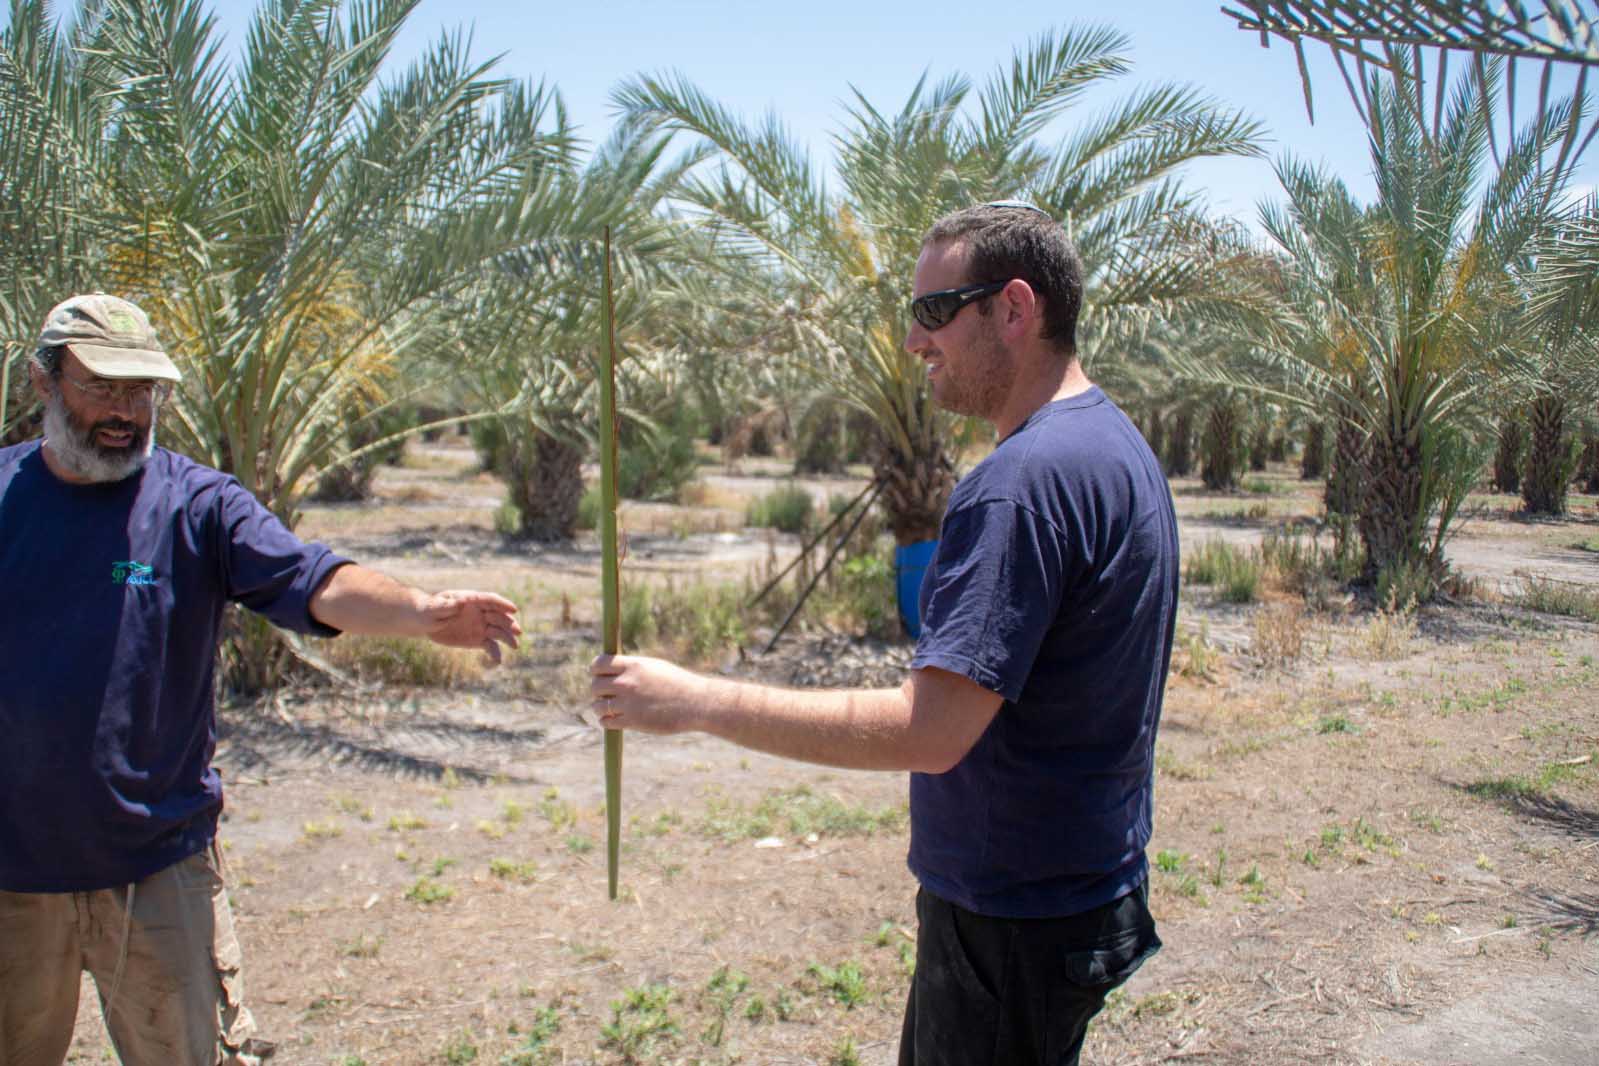 Ra’anan Sternich, who works in the palm fields, presents a suitable specimen of palm branch. (Photo: Guy Teichholtz)